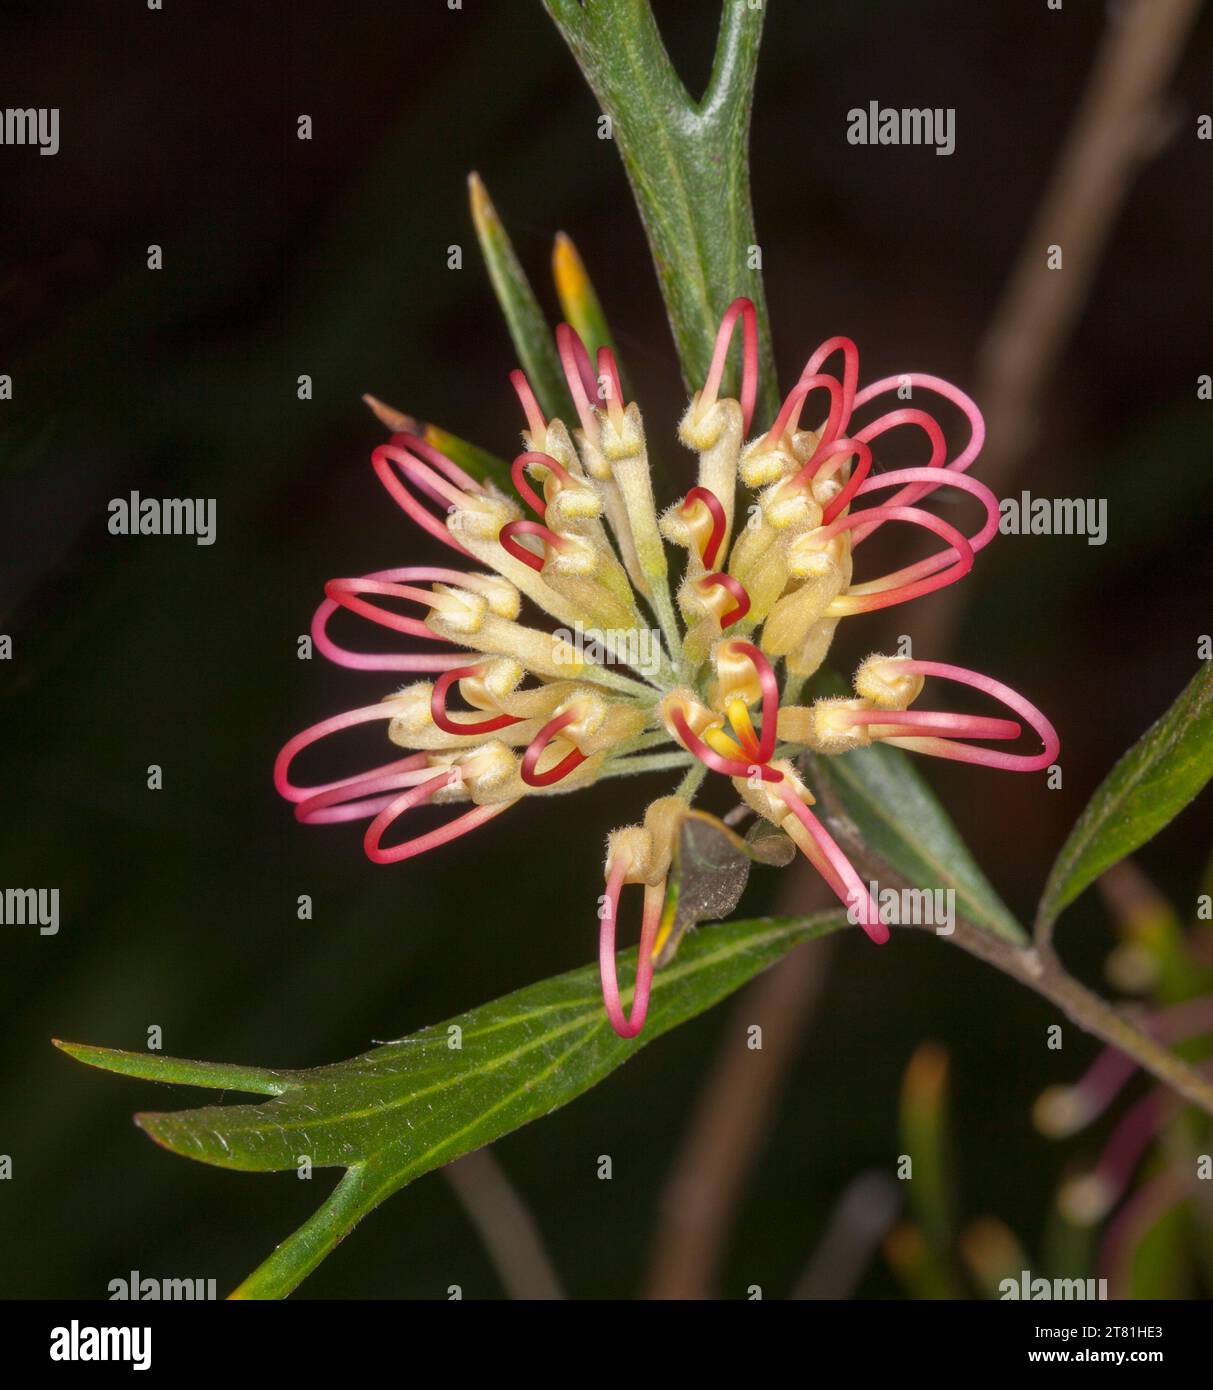 Red and cream flower and green leaves of Grevillea olivacea 'Two Tone', an Australian native shrub, against a dark background Stock Photo